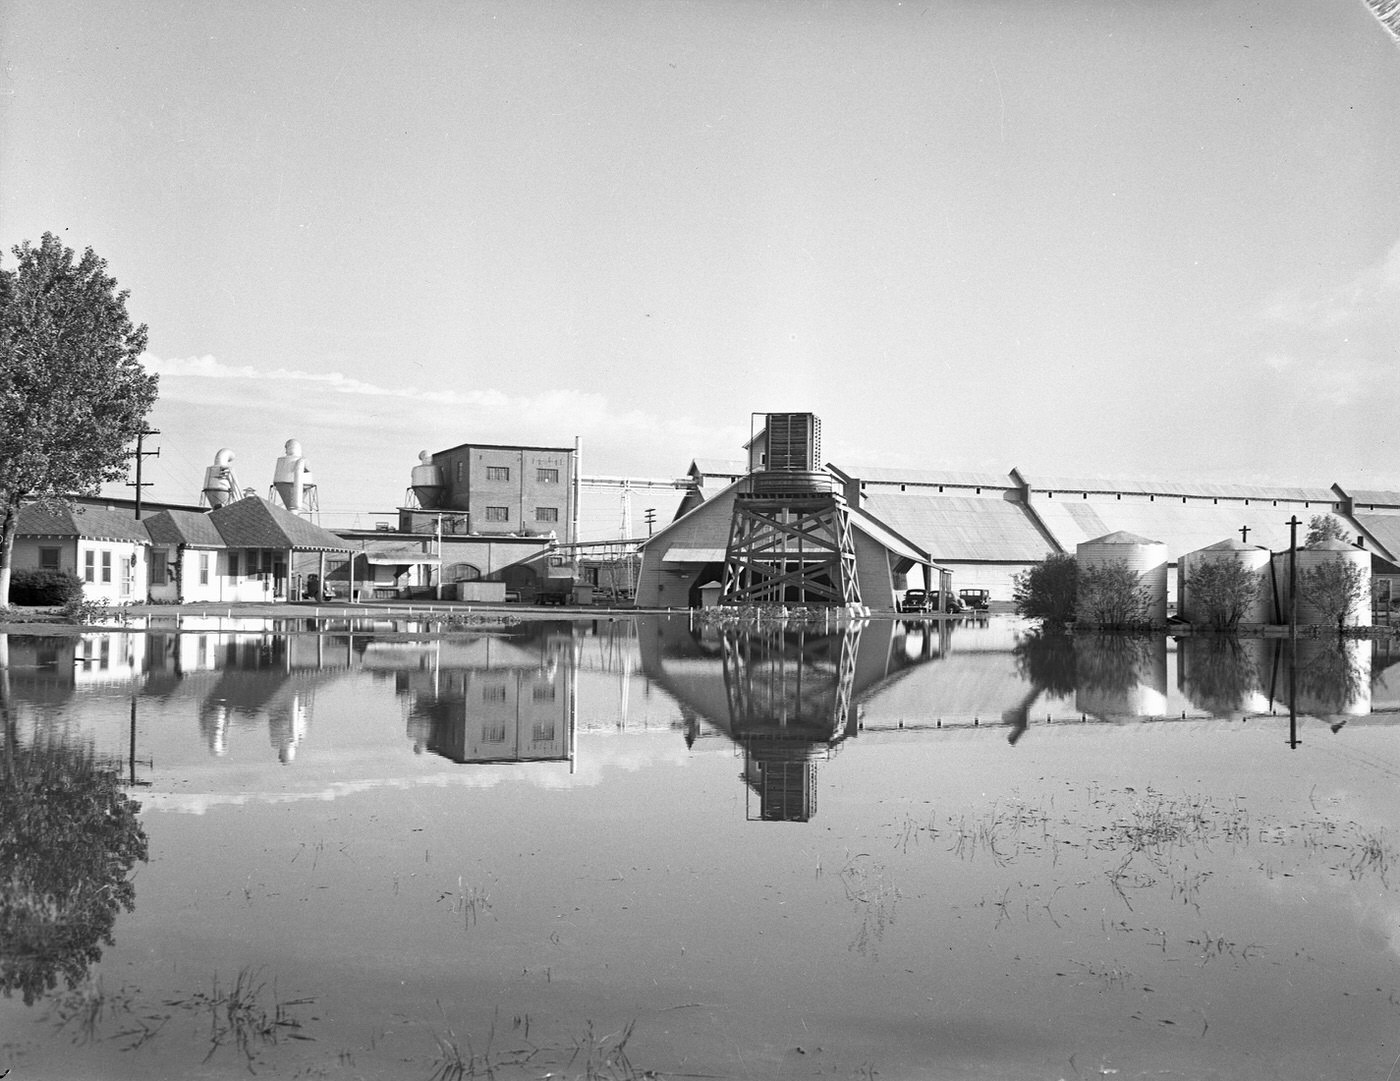 A cotton oil mill, the foreground appears to be flooded. Exterior of the Traders Cotton Oil Mill Company in Fort Worth, Texas, 1942